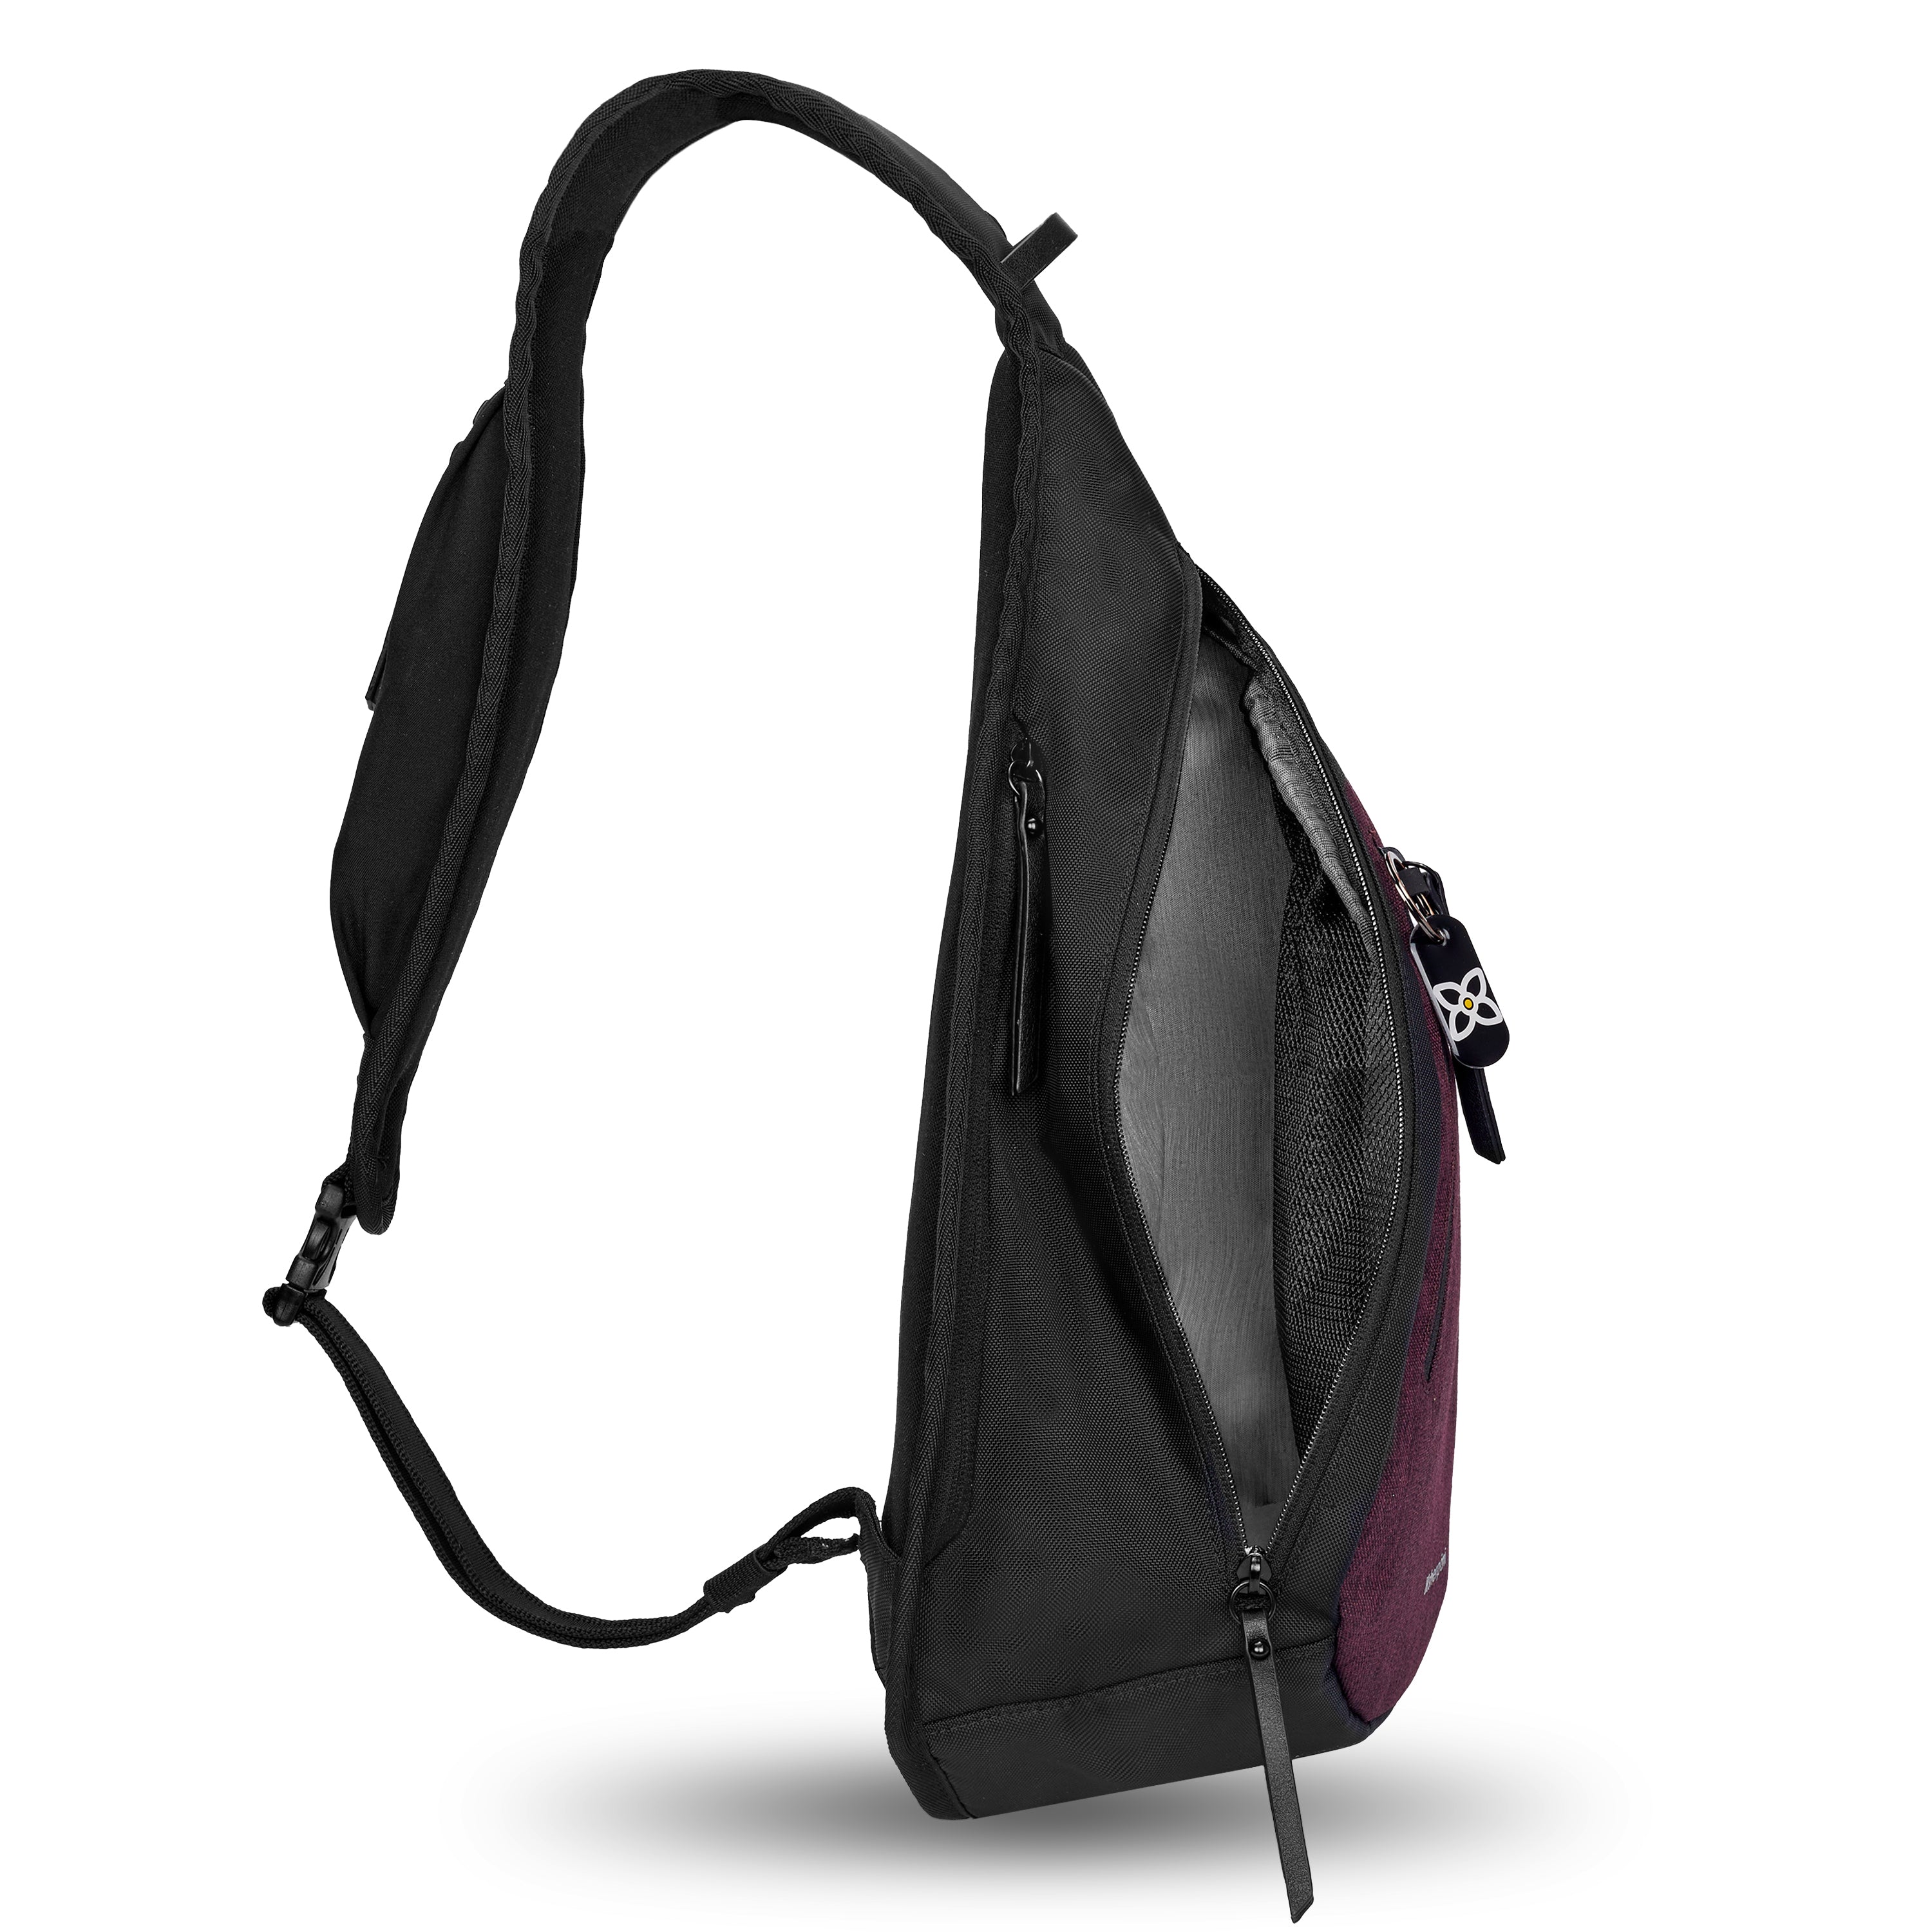 Side view of Sherpani’s Anti-Theft bag, the Esprit AT in Merlot, with vegan leather accents in black. The main zipper compartment is open to reveal a lime pale blue. 